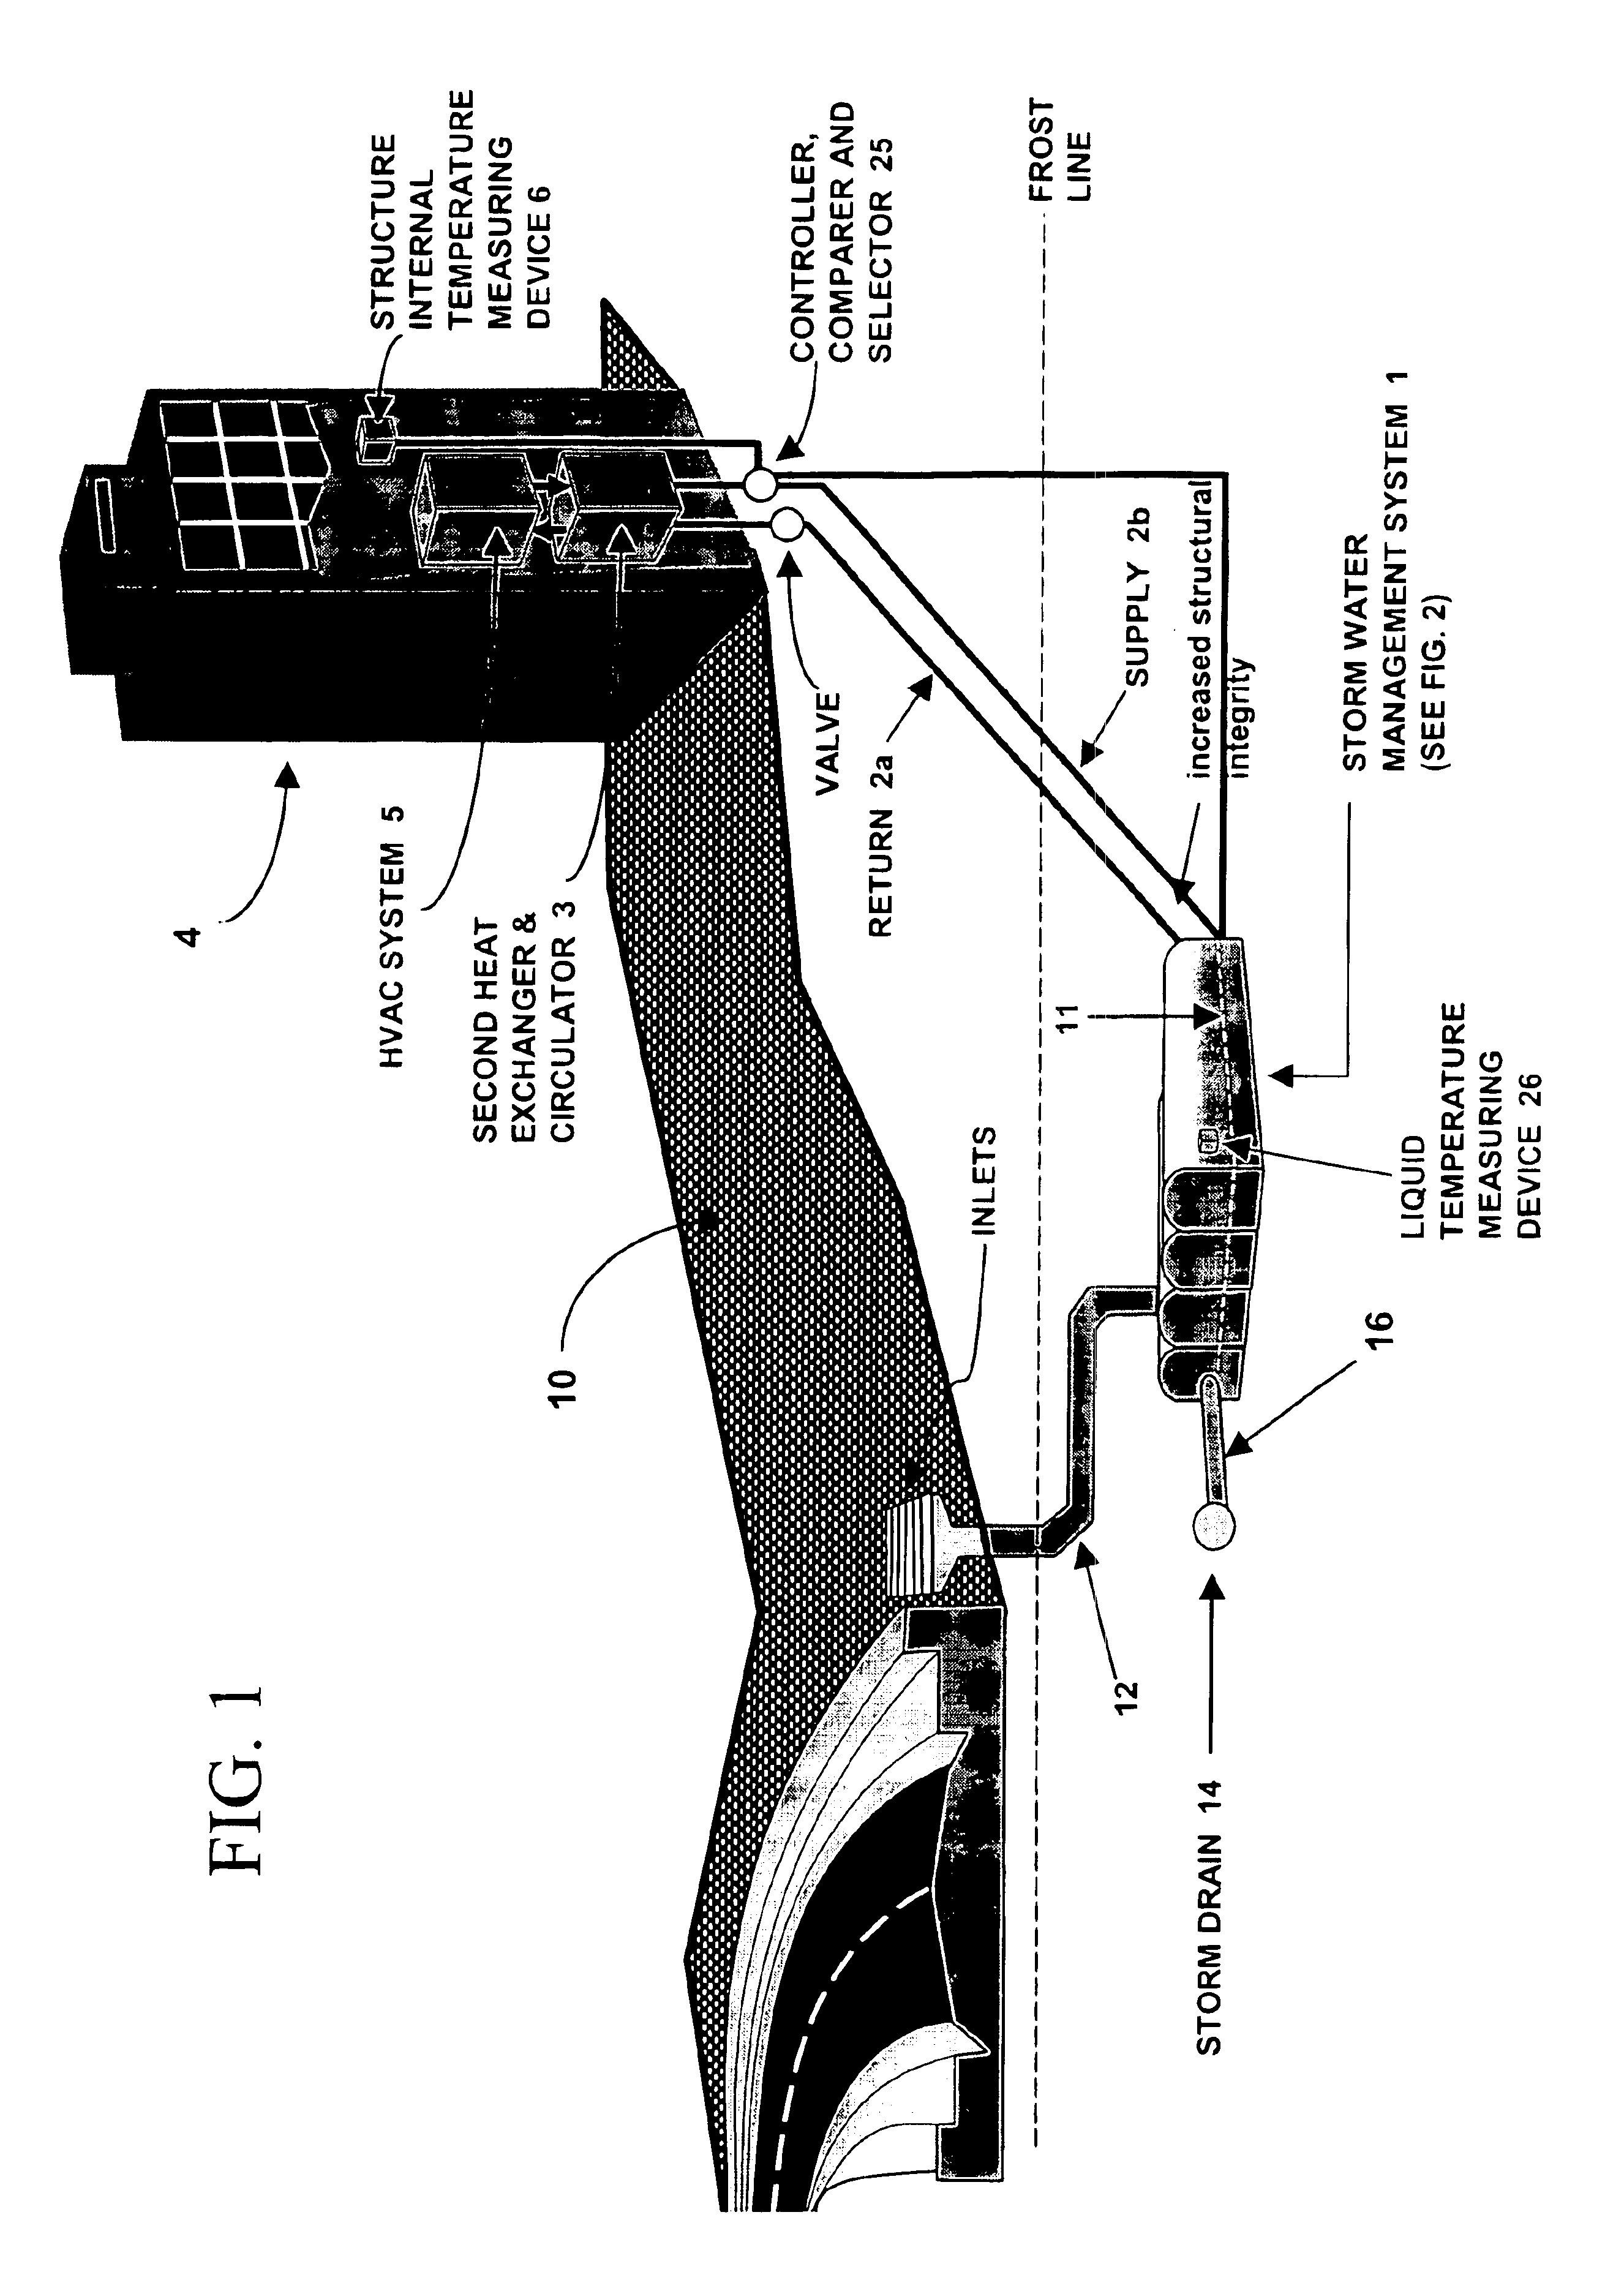 Method and system for storm water system heat exchange